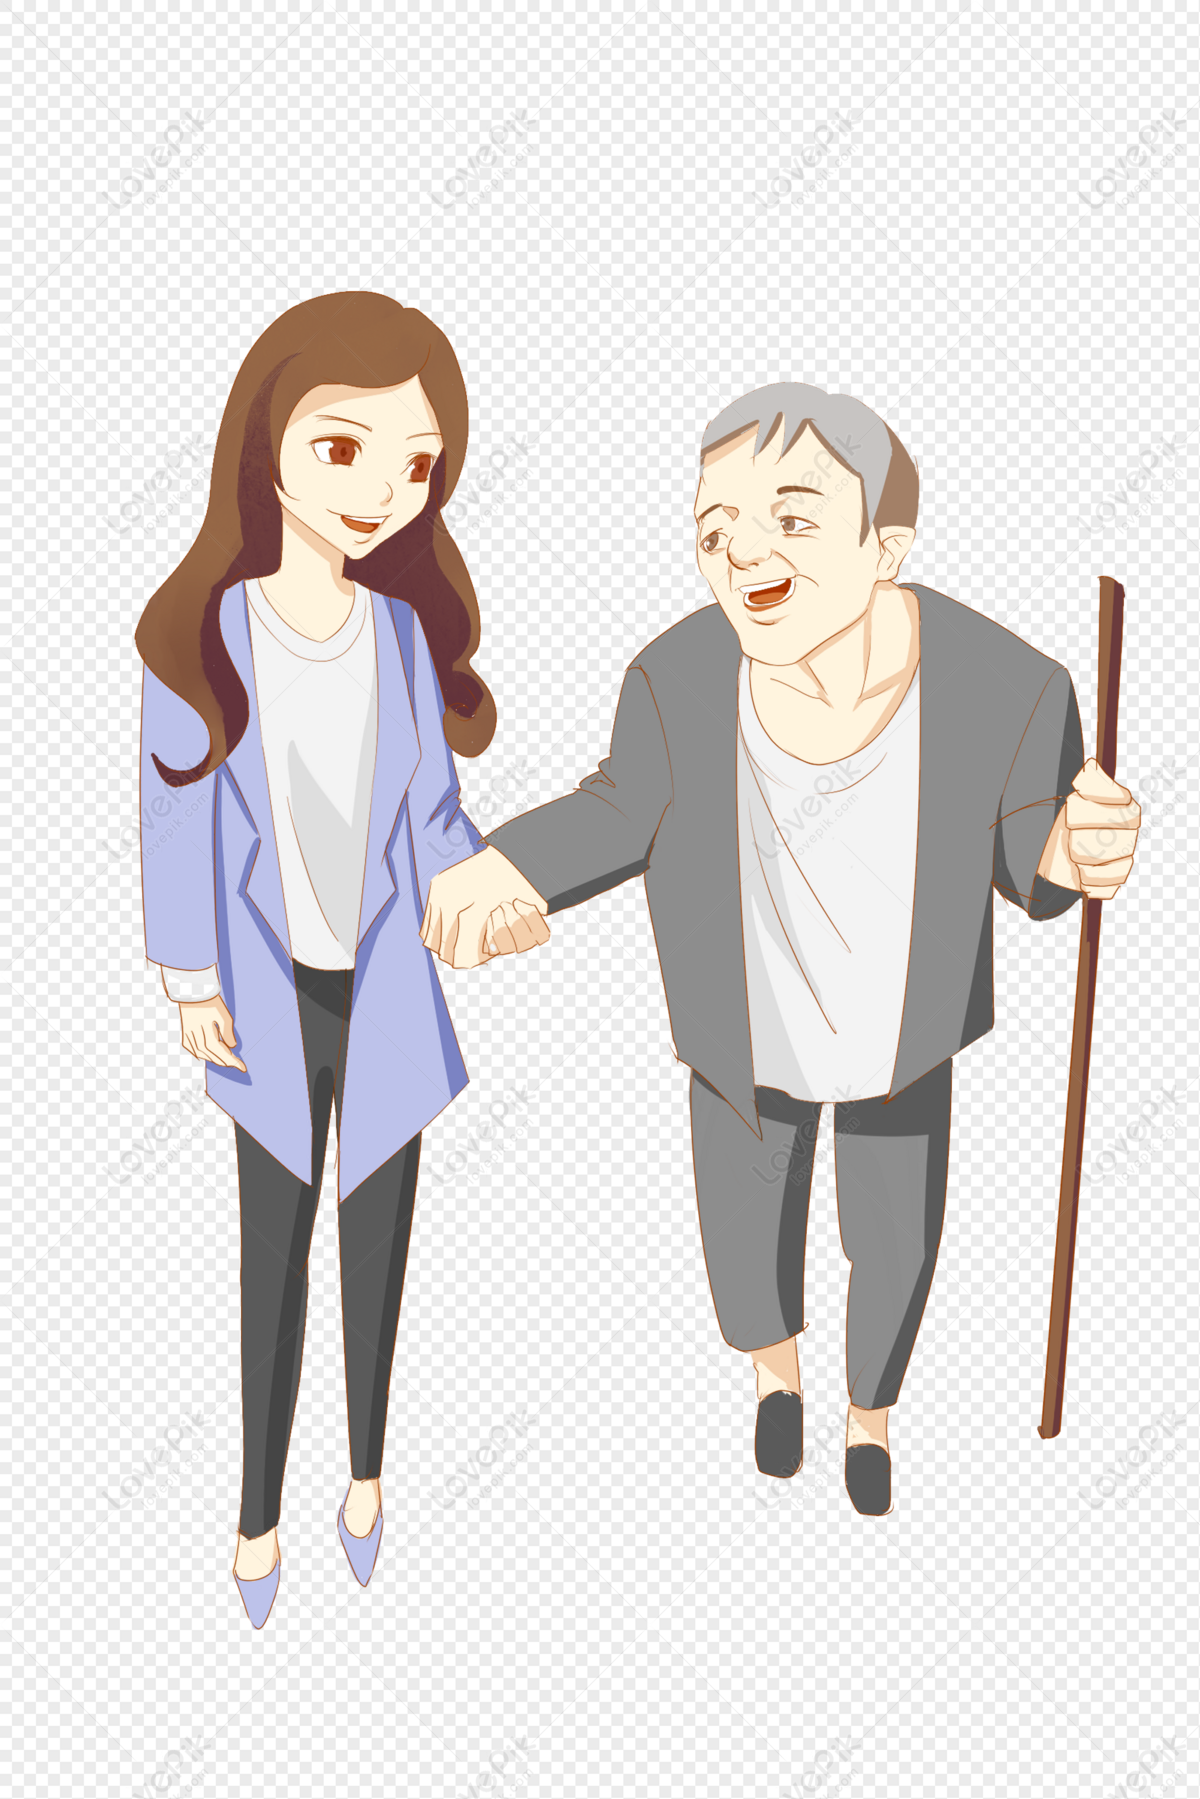 Father And Daughter PNG Transparent And Clipart Image For Free Download ...